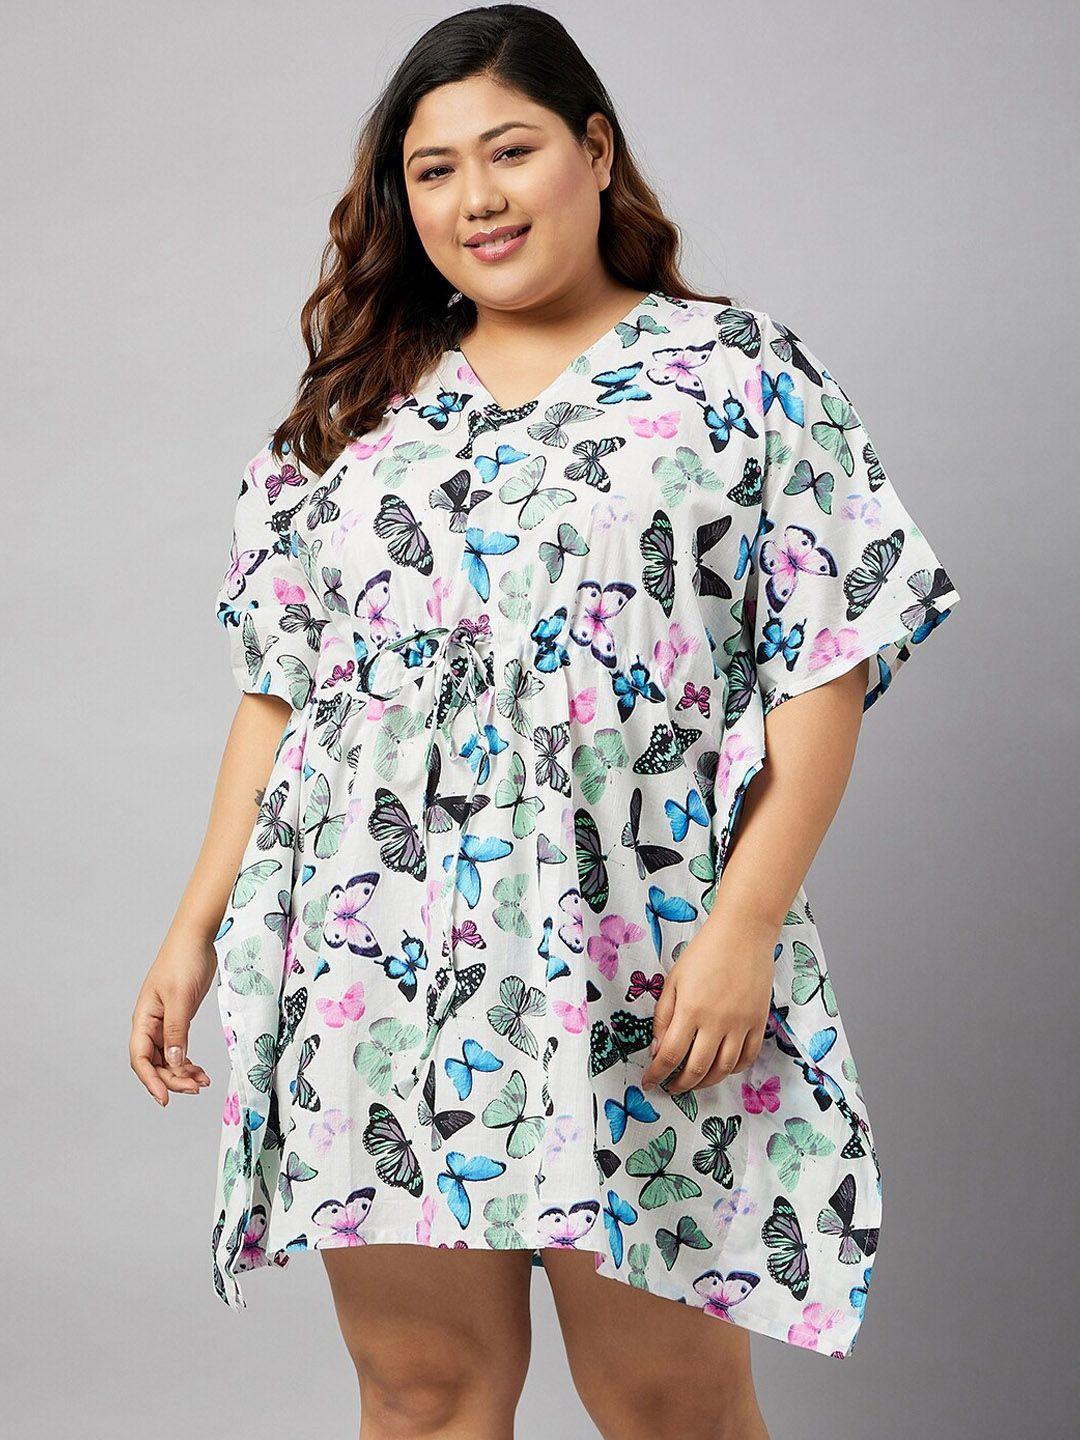 curves by zerokaata women abstract printed plus size pure cotton kaftan cover up dress